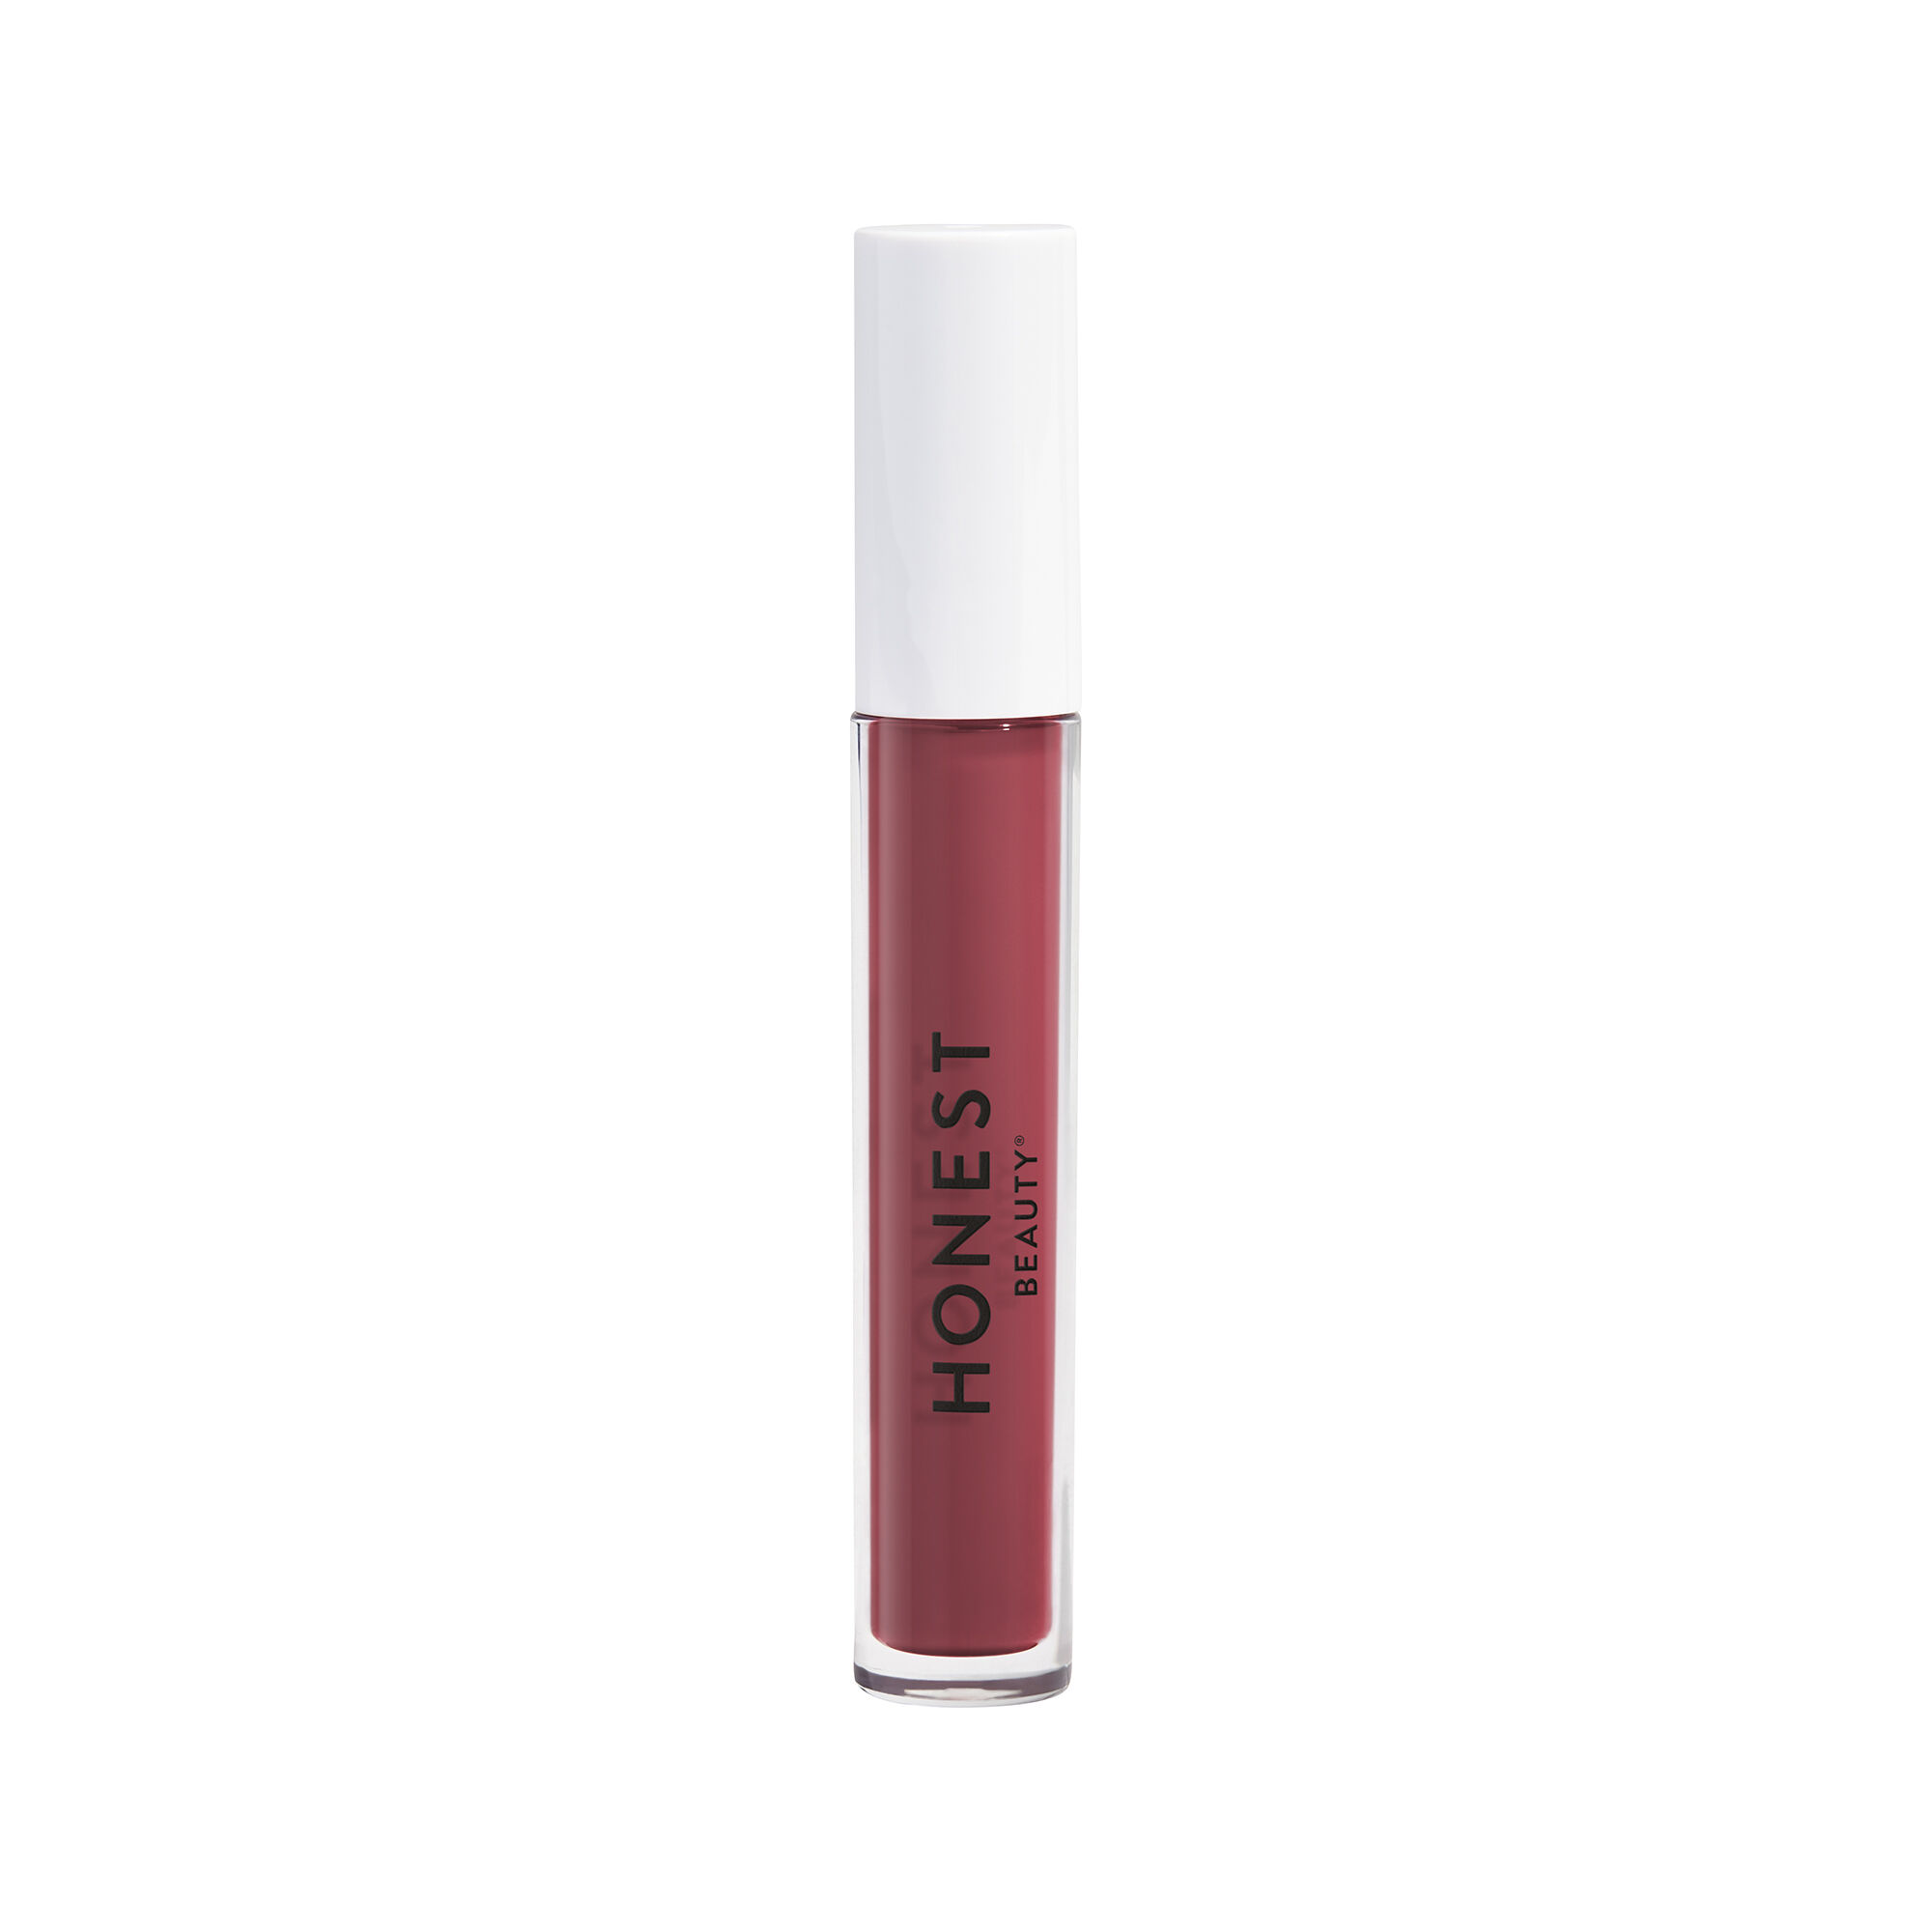 Honest Beauty Lipstick in a dark rose shade named Passion.